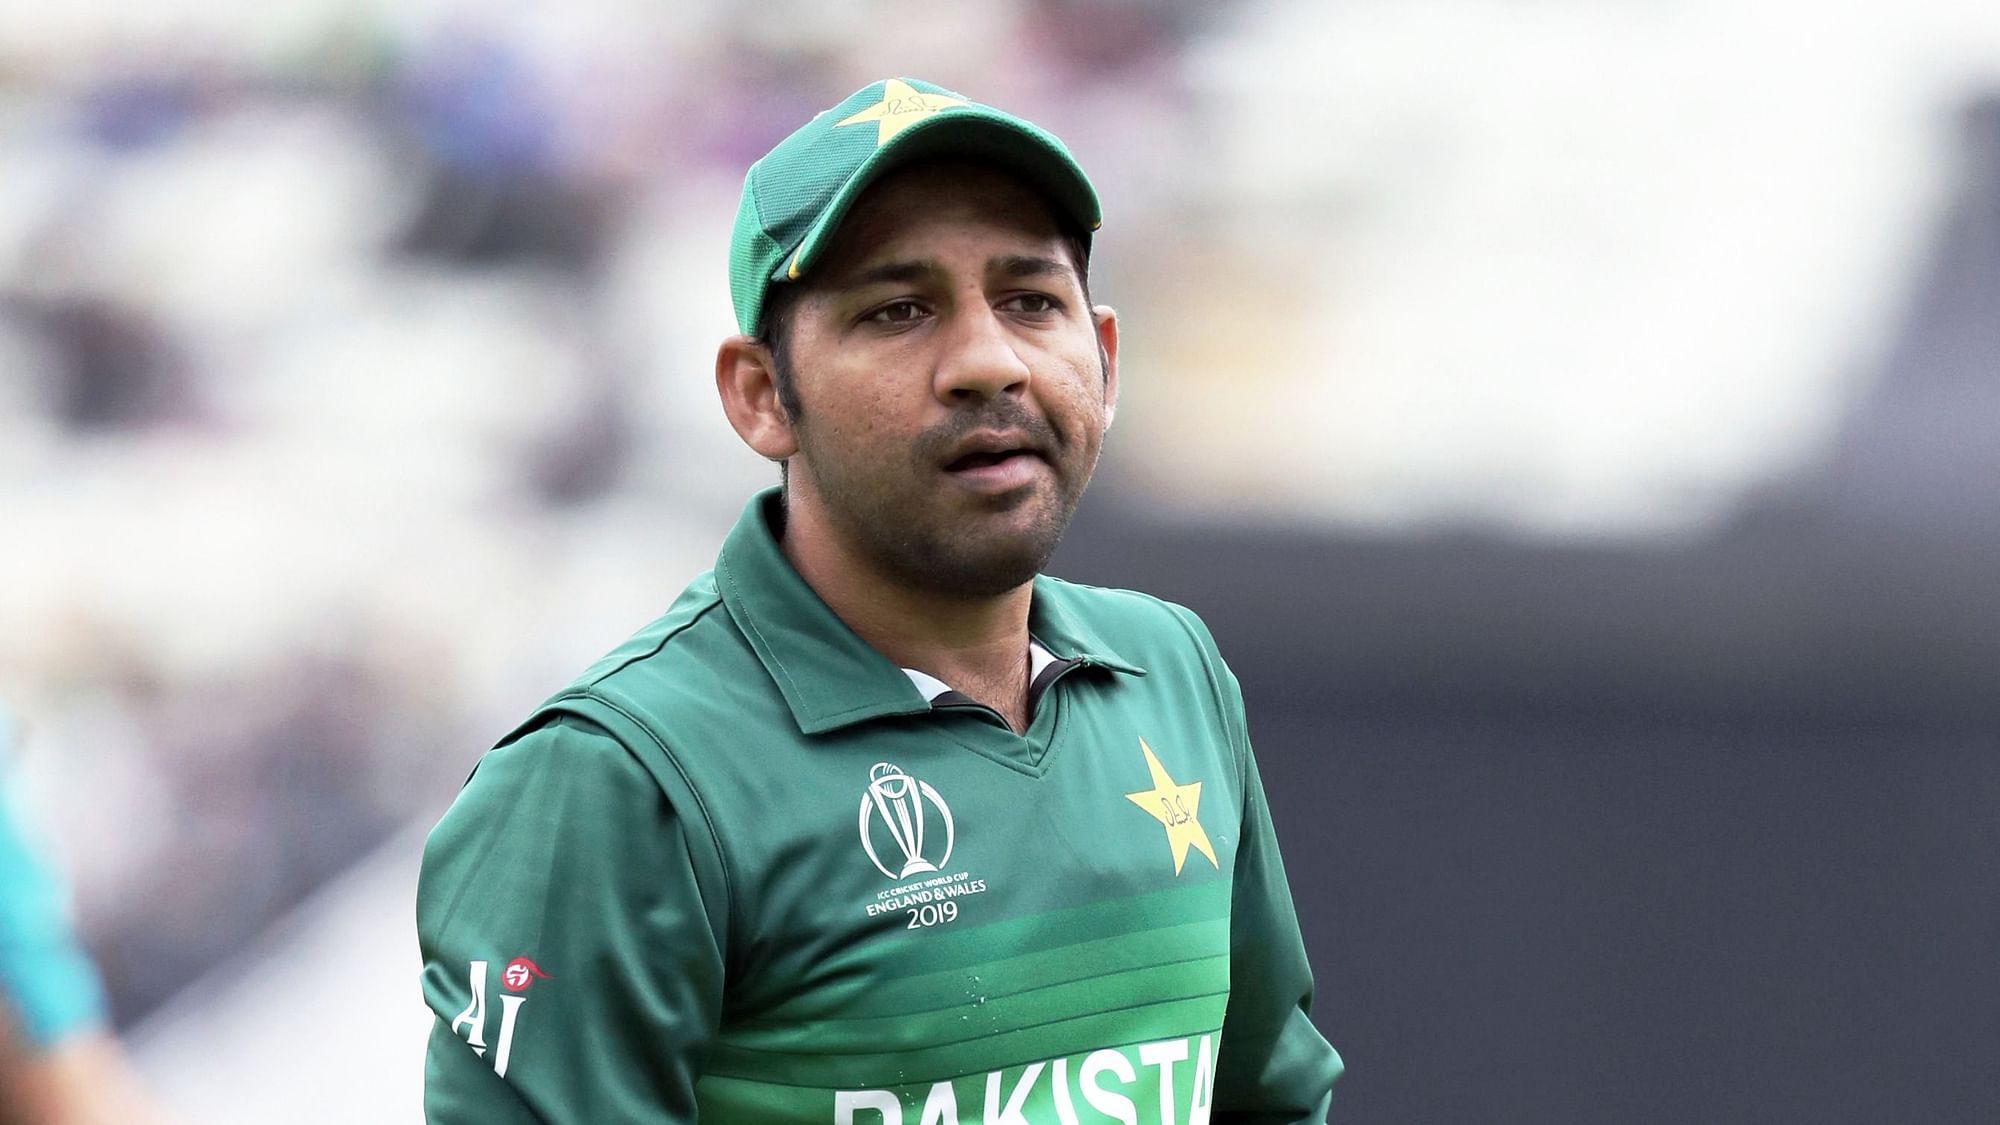 Pakistan skipper Sarfaraz Ahmed came under severe criticism after the team’s poor start to the 2019 ICC World Cup.